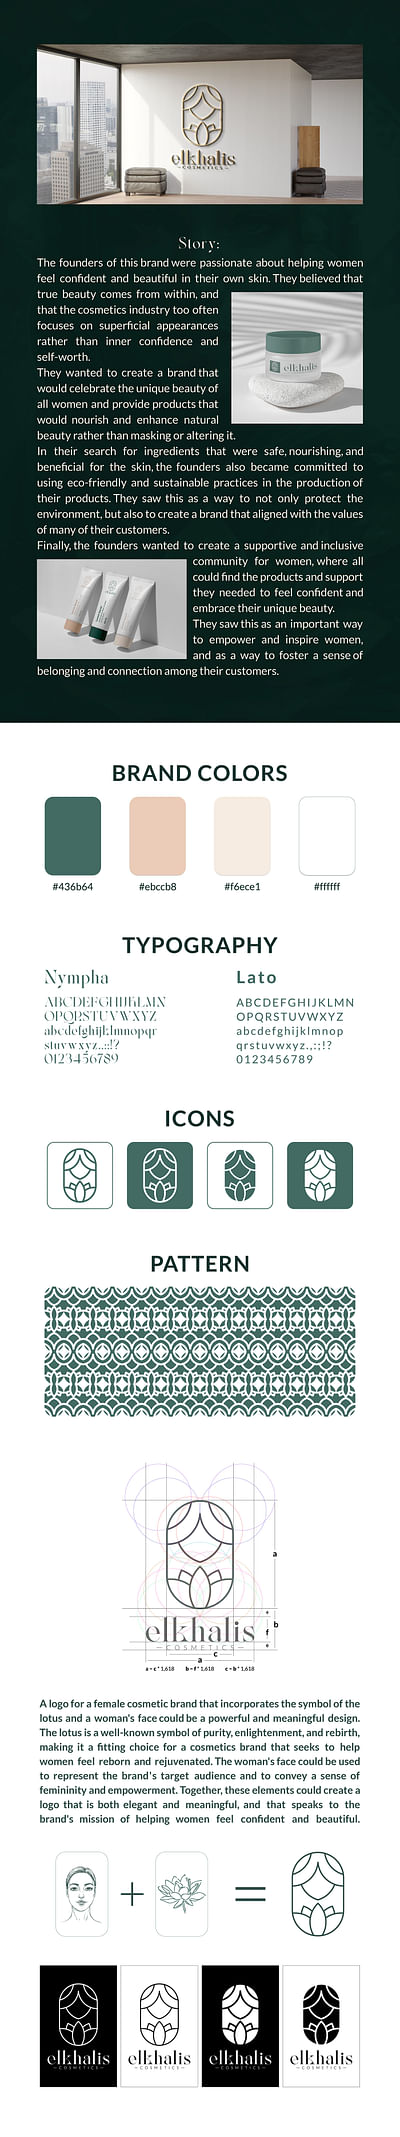 ELKHALIS | Story, Typography, Icons & Patterns - Graphic Identity